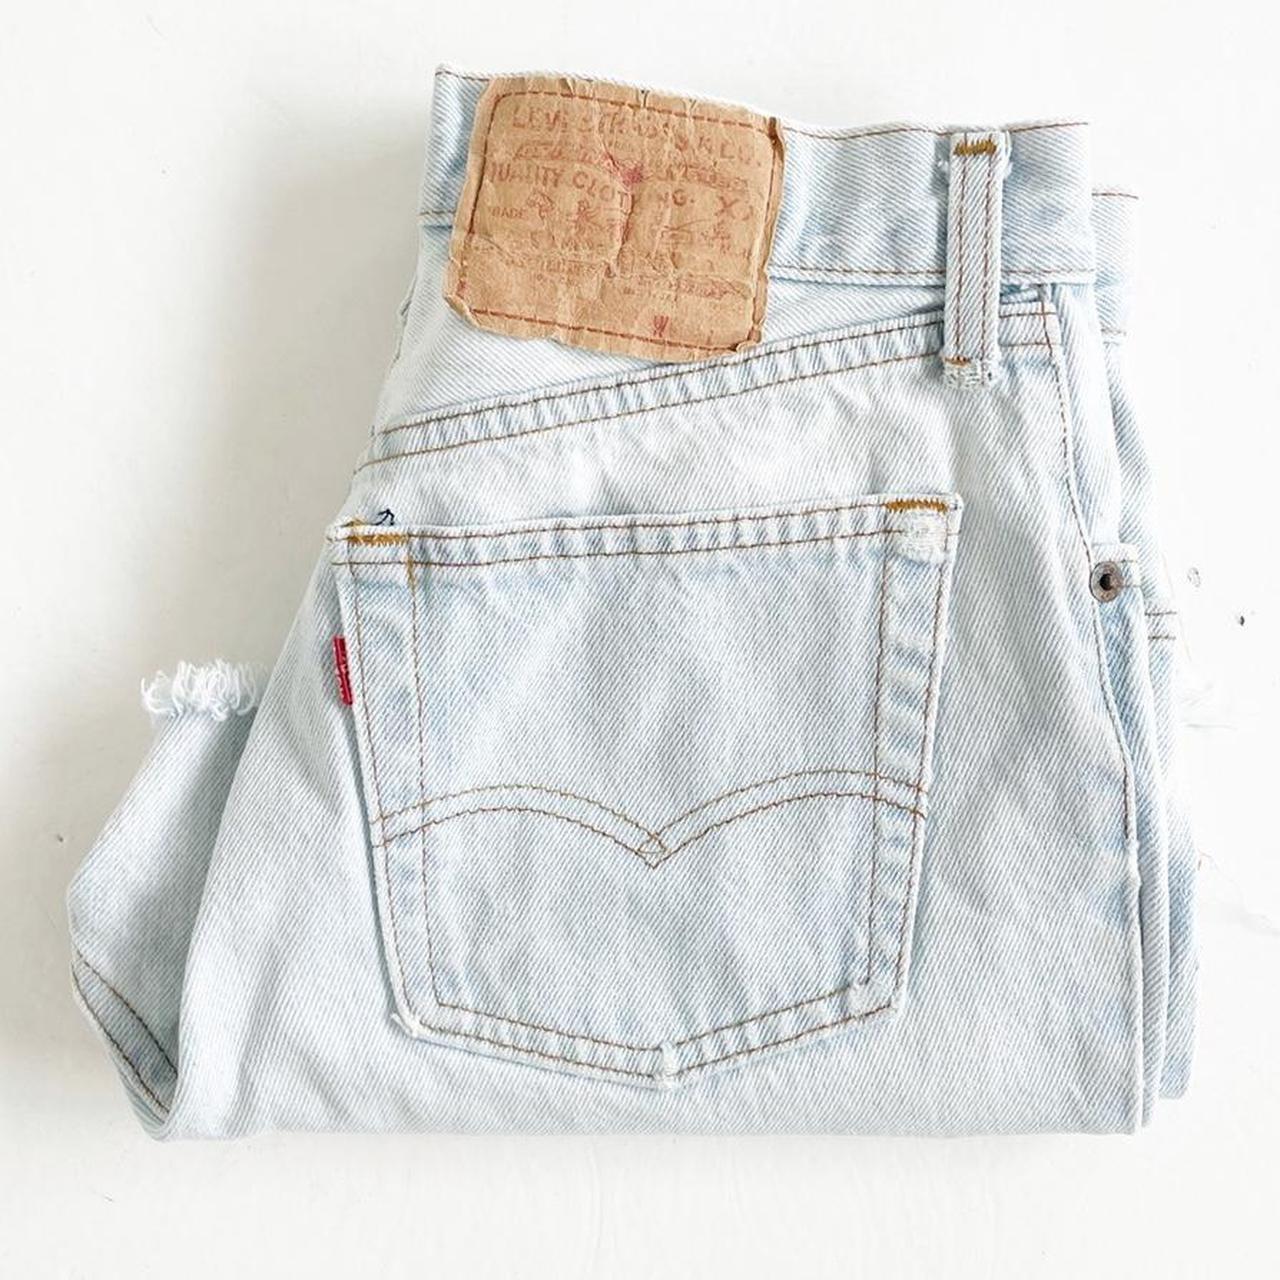 Vintage 501 Levi’s Made in USA High waisted with raw... - Depop